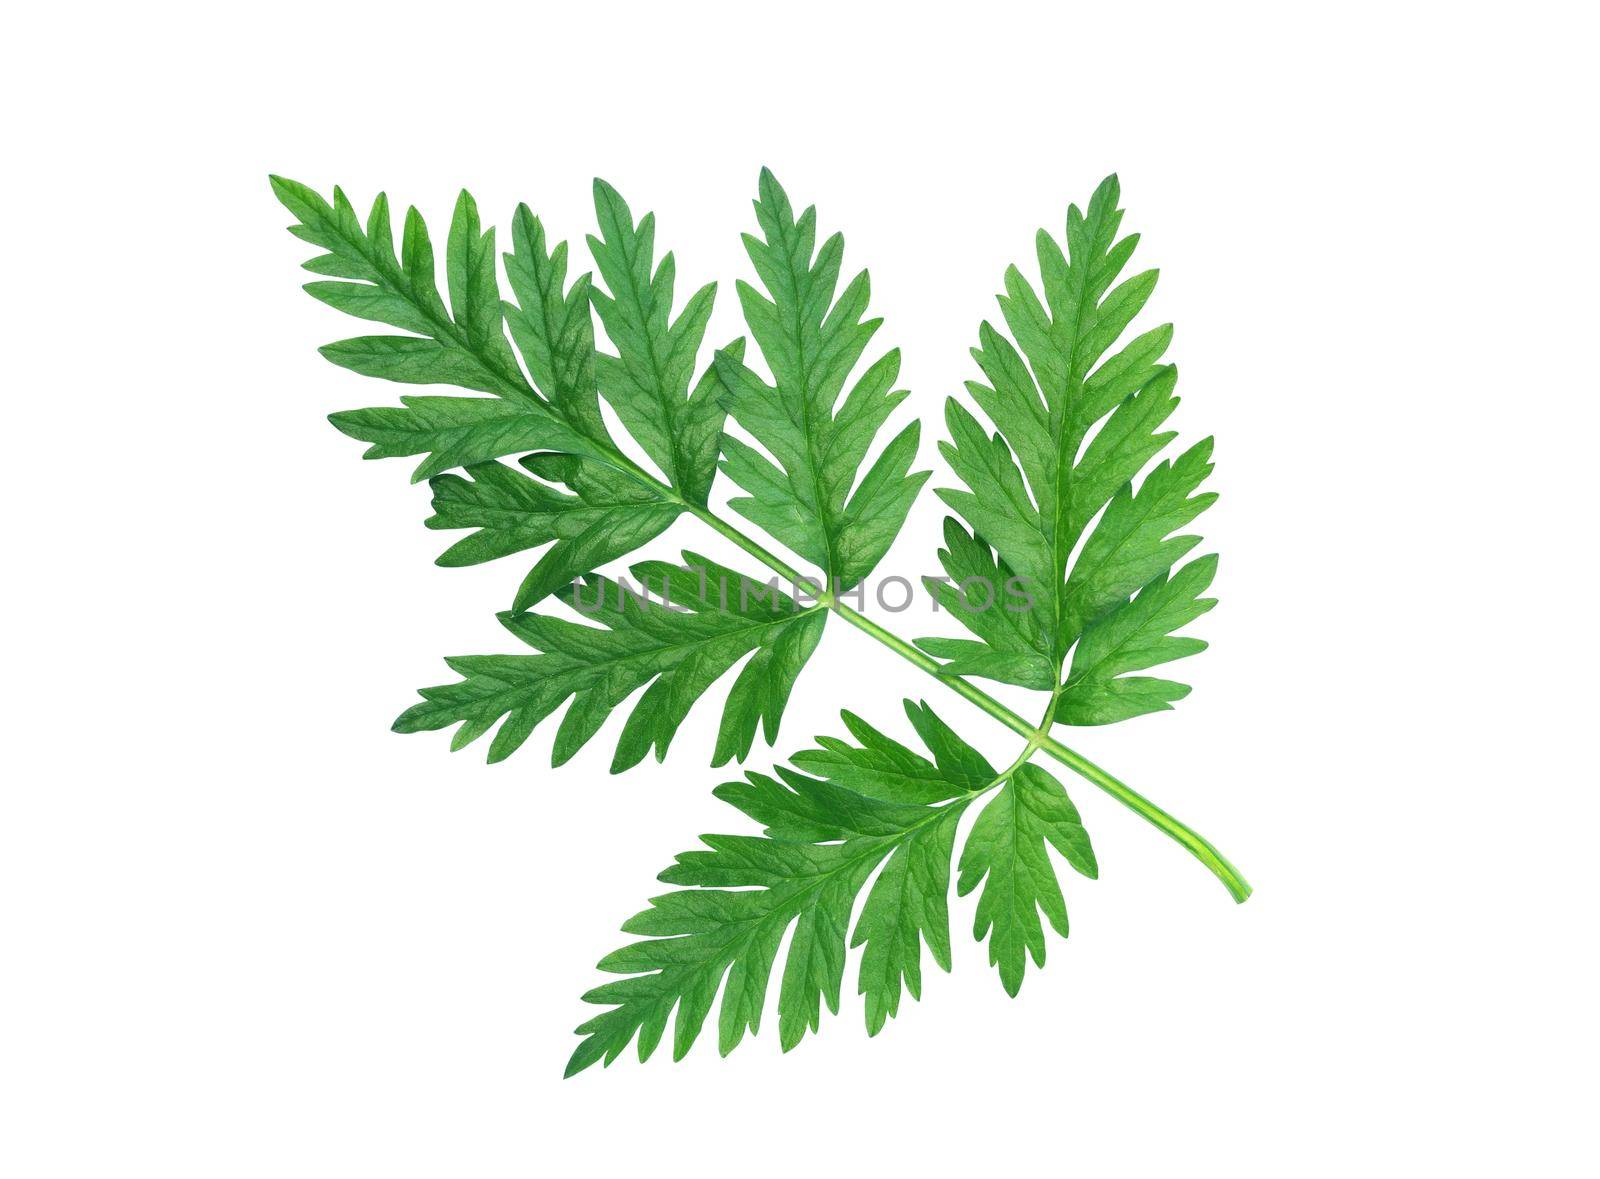 Freshness green leaves isolated on white background with clipping path